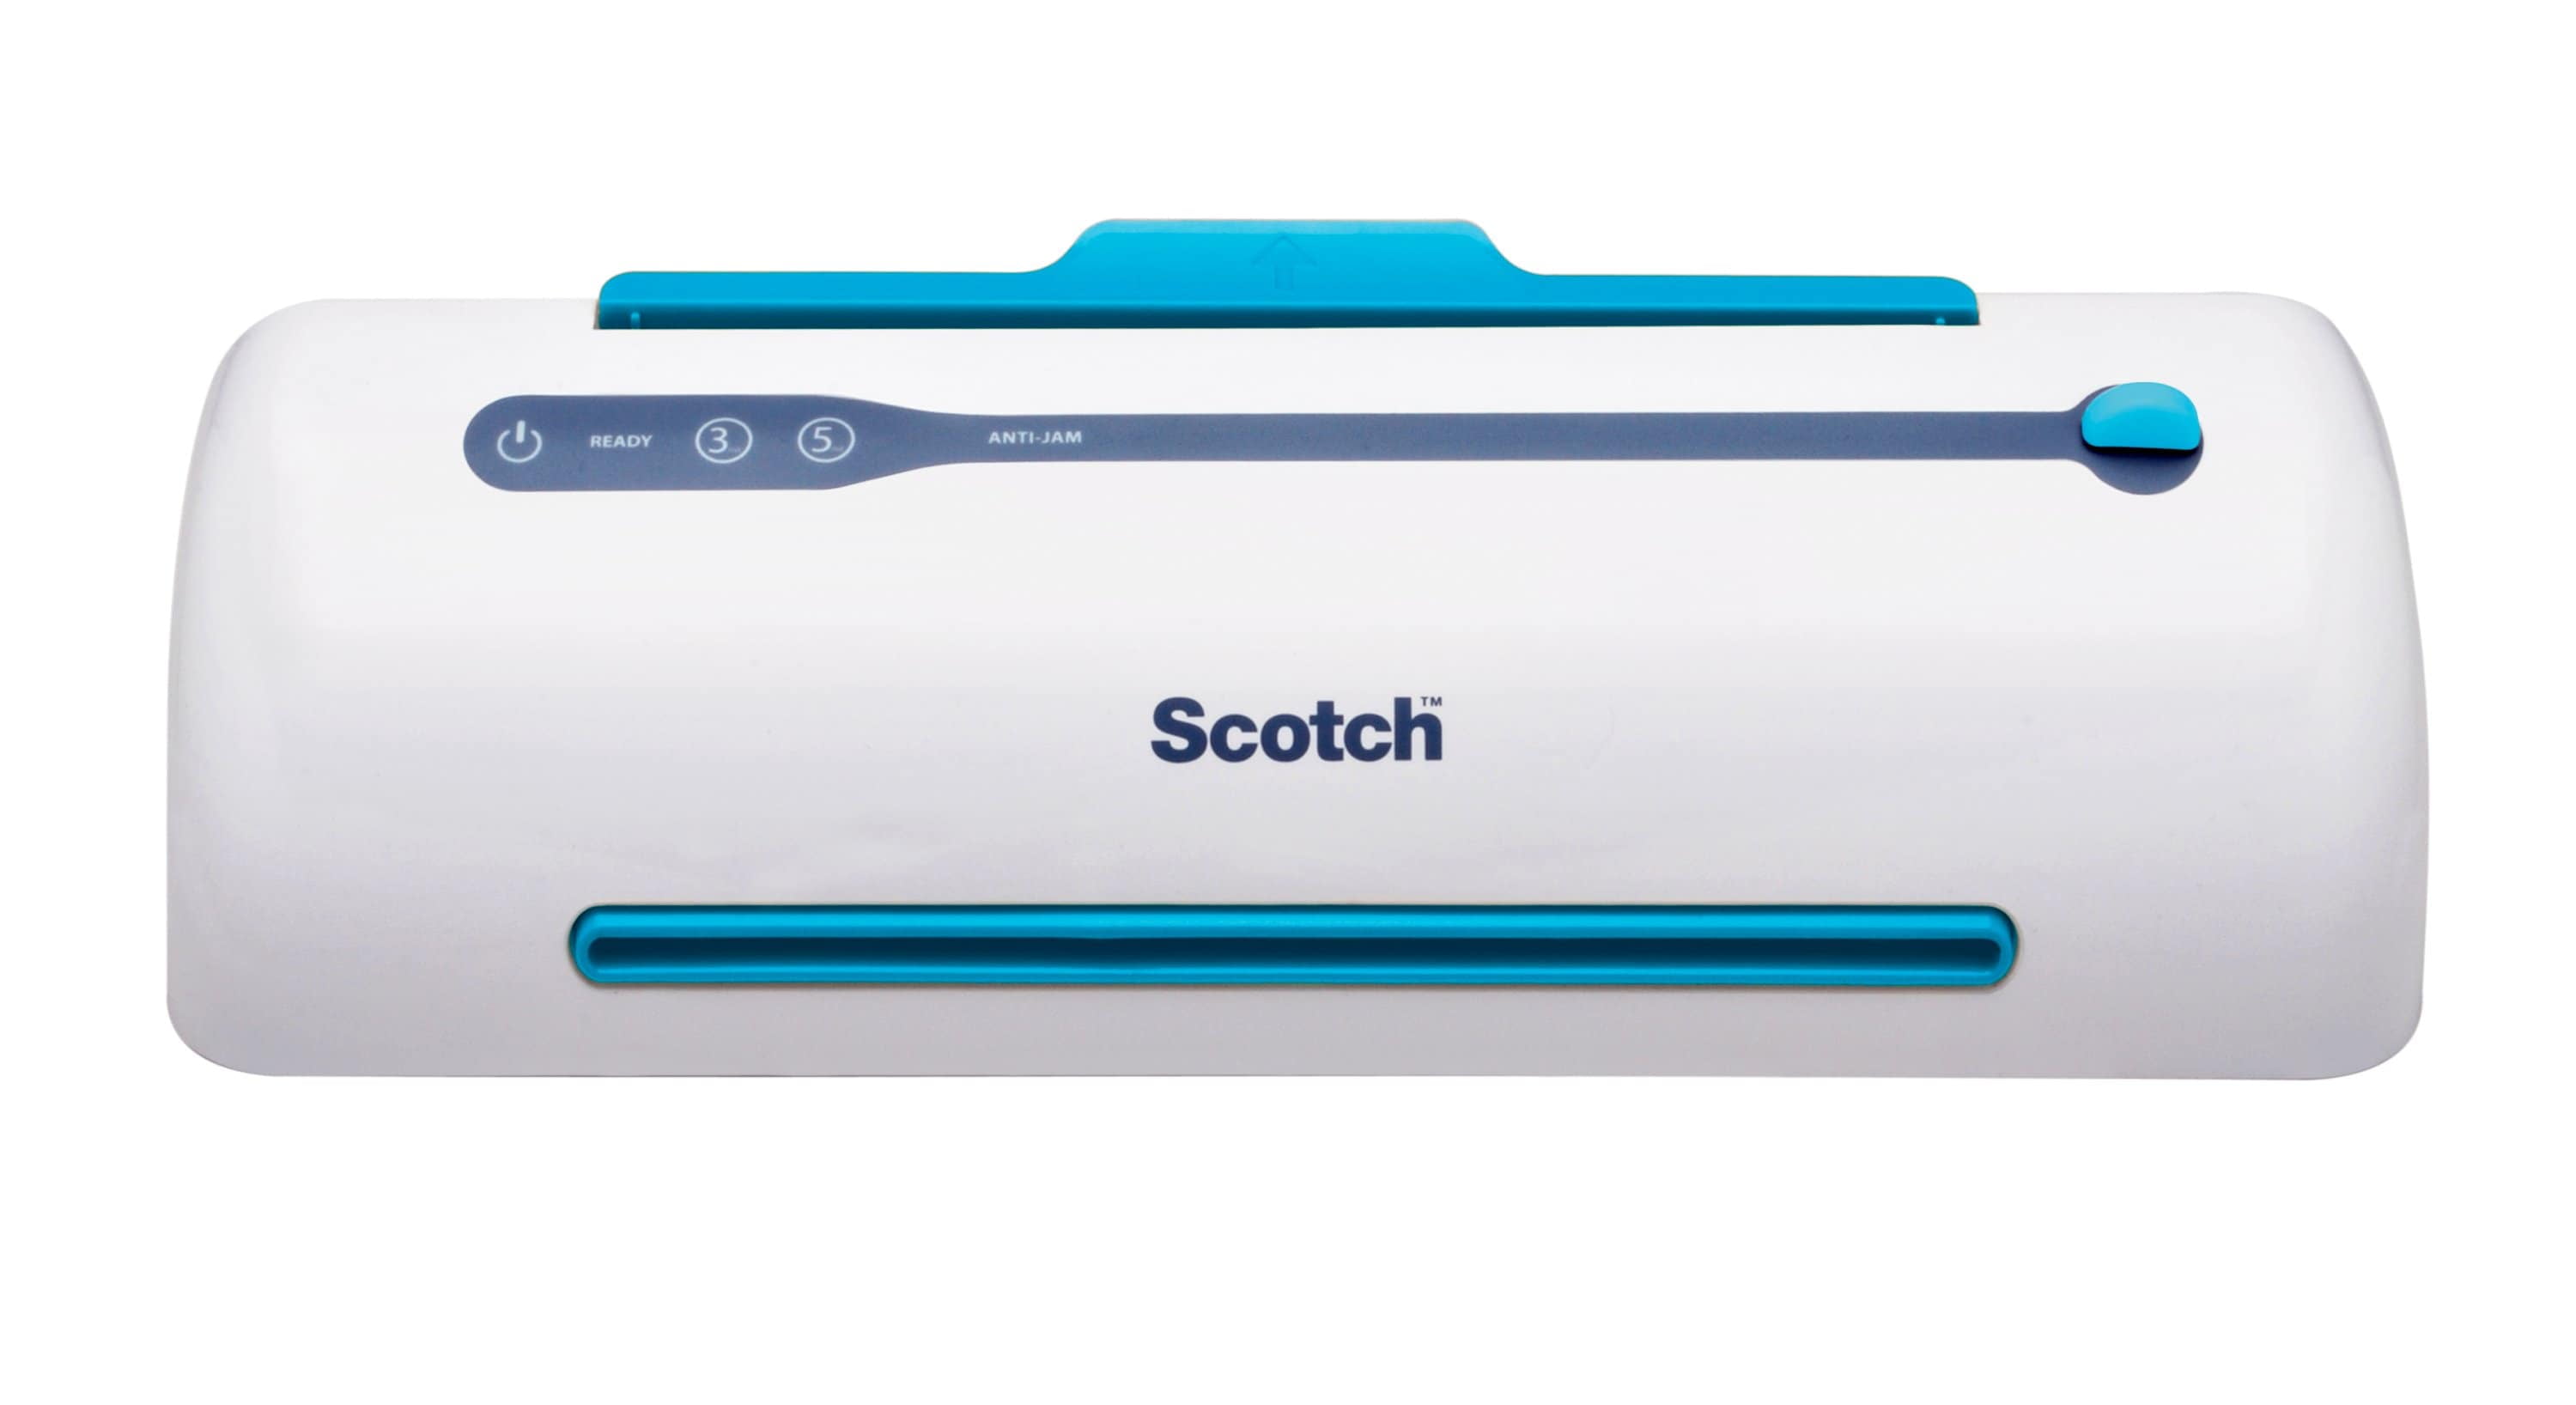 Scotch TL901C Thermal Laminator 2 Roller System Bundle with 100 Assorted Pouch Sizes and a Plexon Pen 7